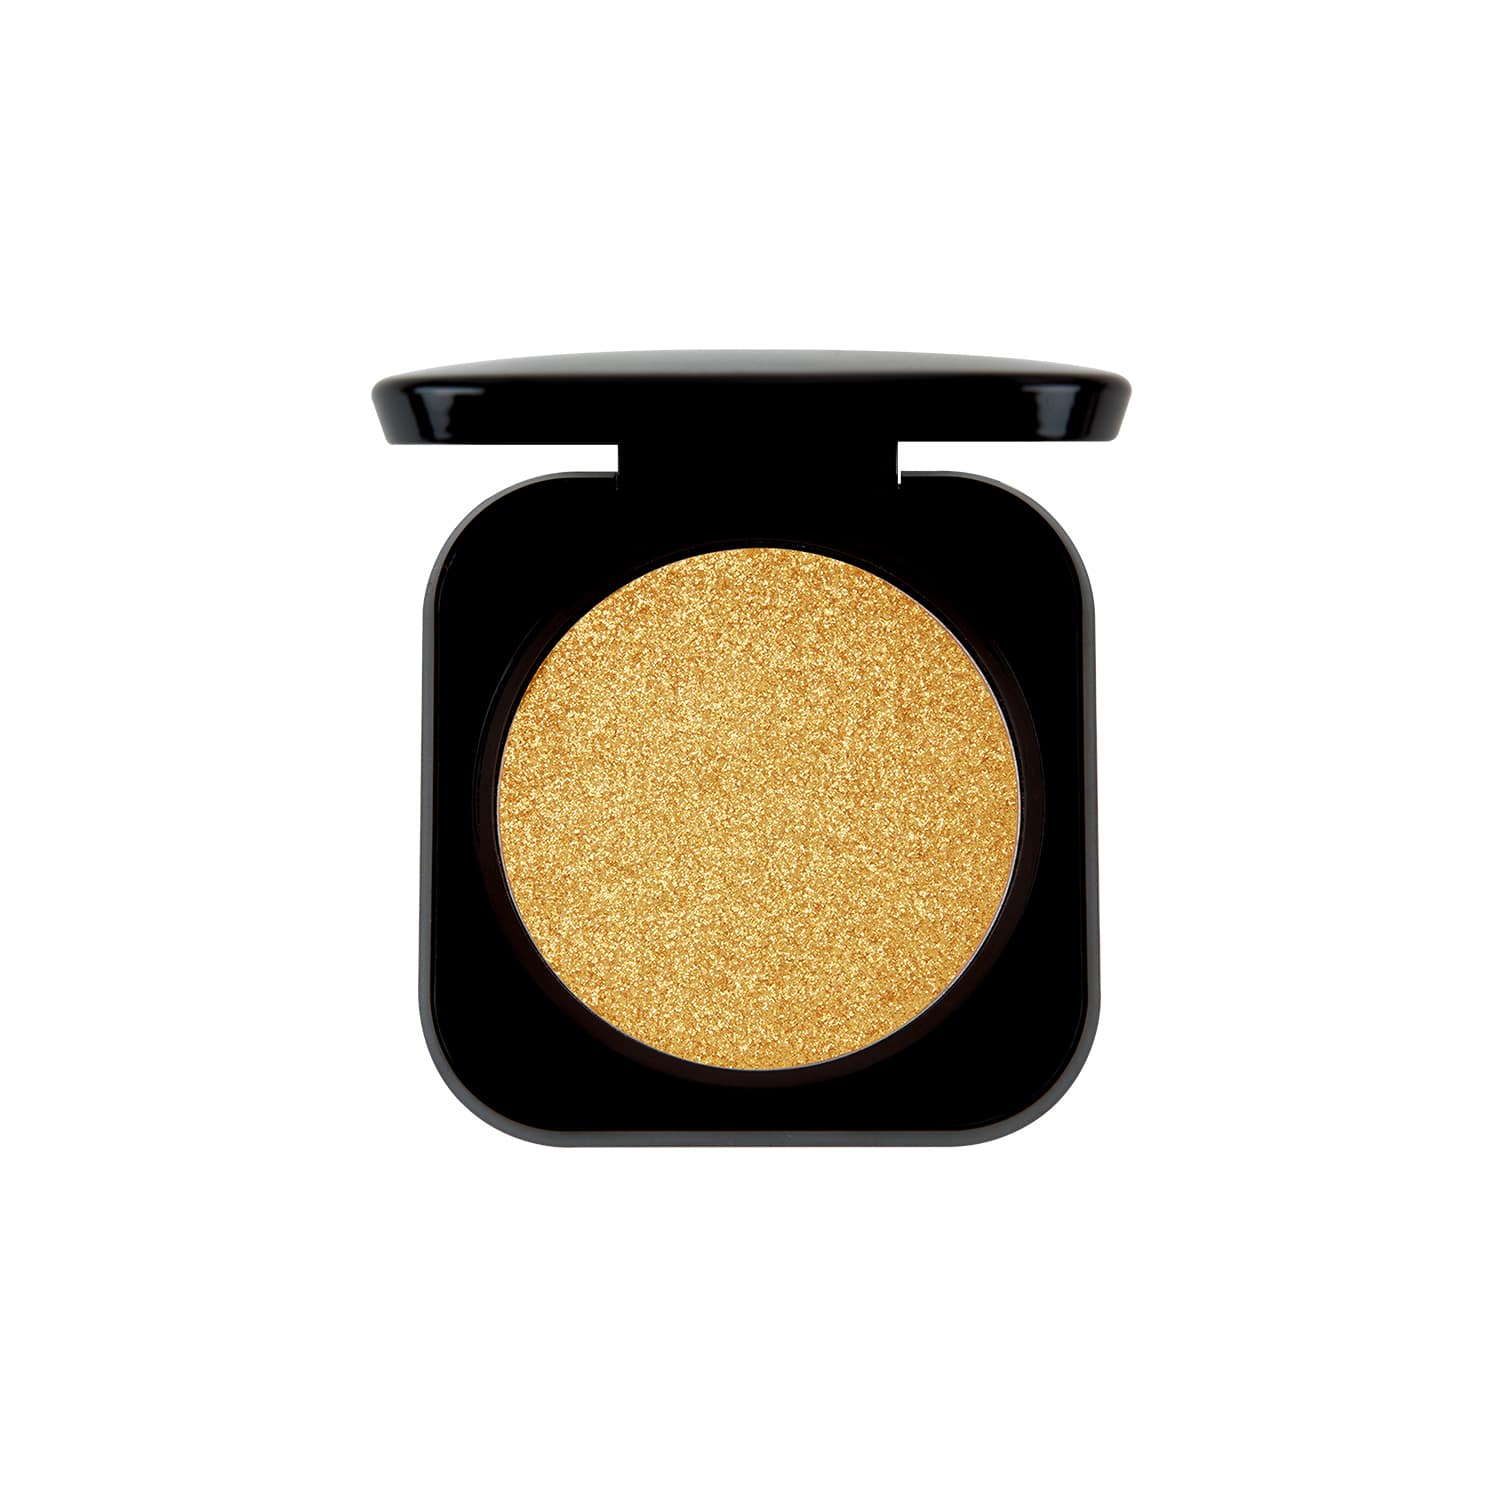 PAC Master Glow Highlighter - 05 (High On Glow) PAC